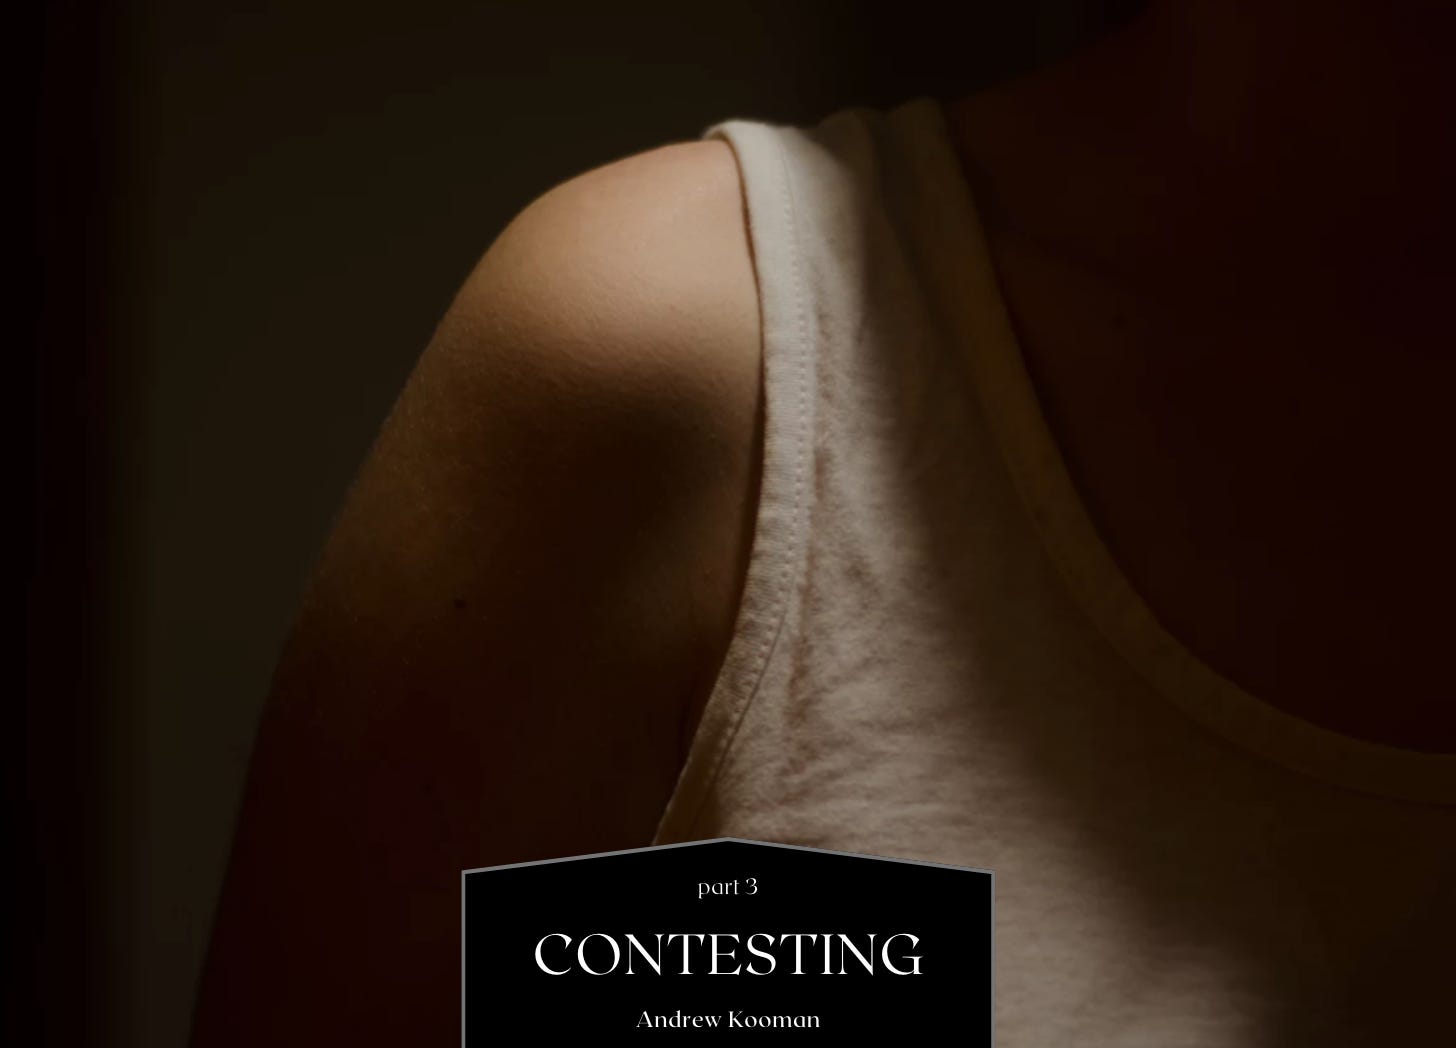 Contesting - Part 3 in the serial drama released exclusively on Andrew Kooman's Substack